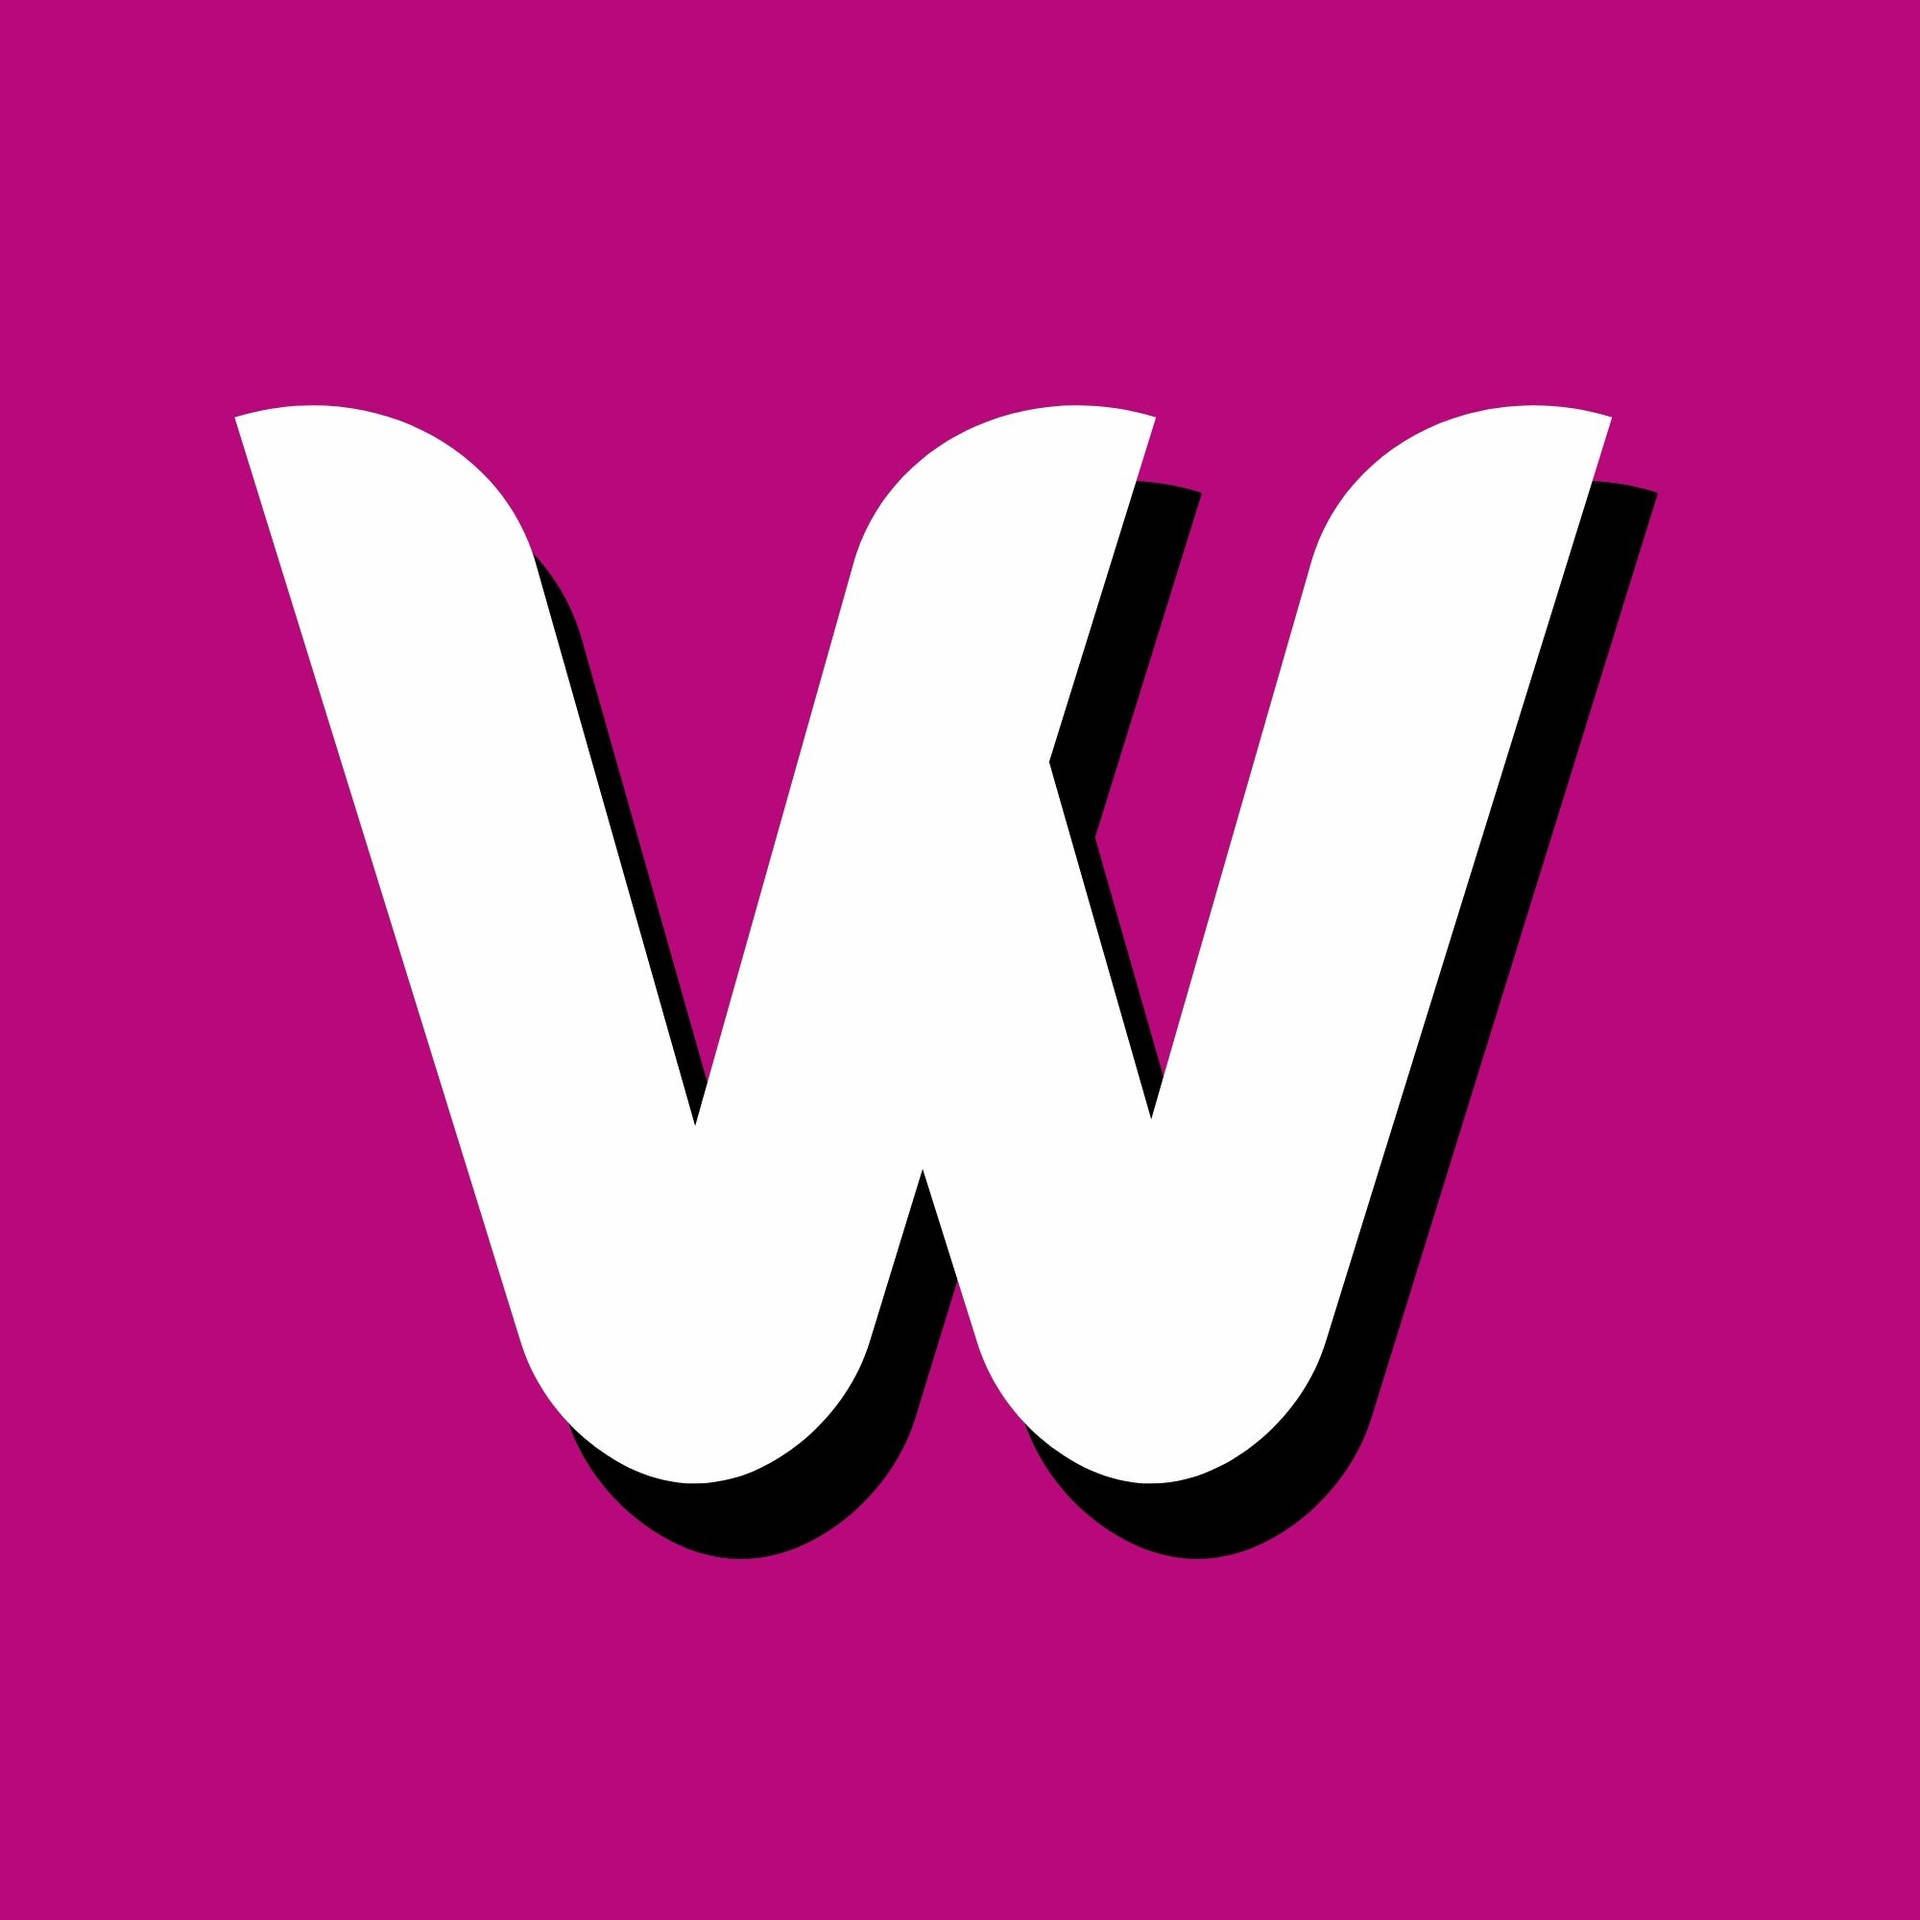 Vibrant Magenta Background Featuring the Letter W Wallpaper